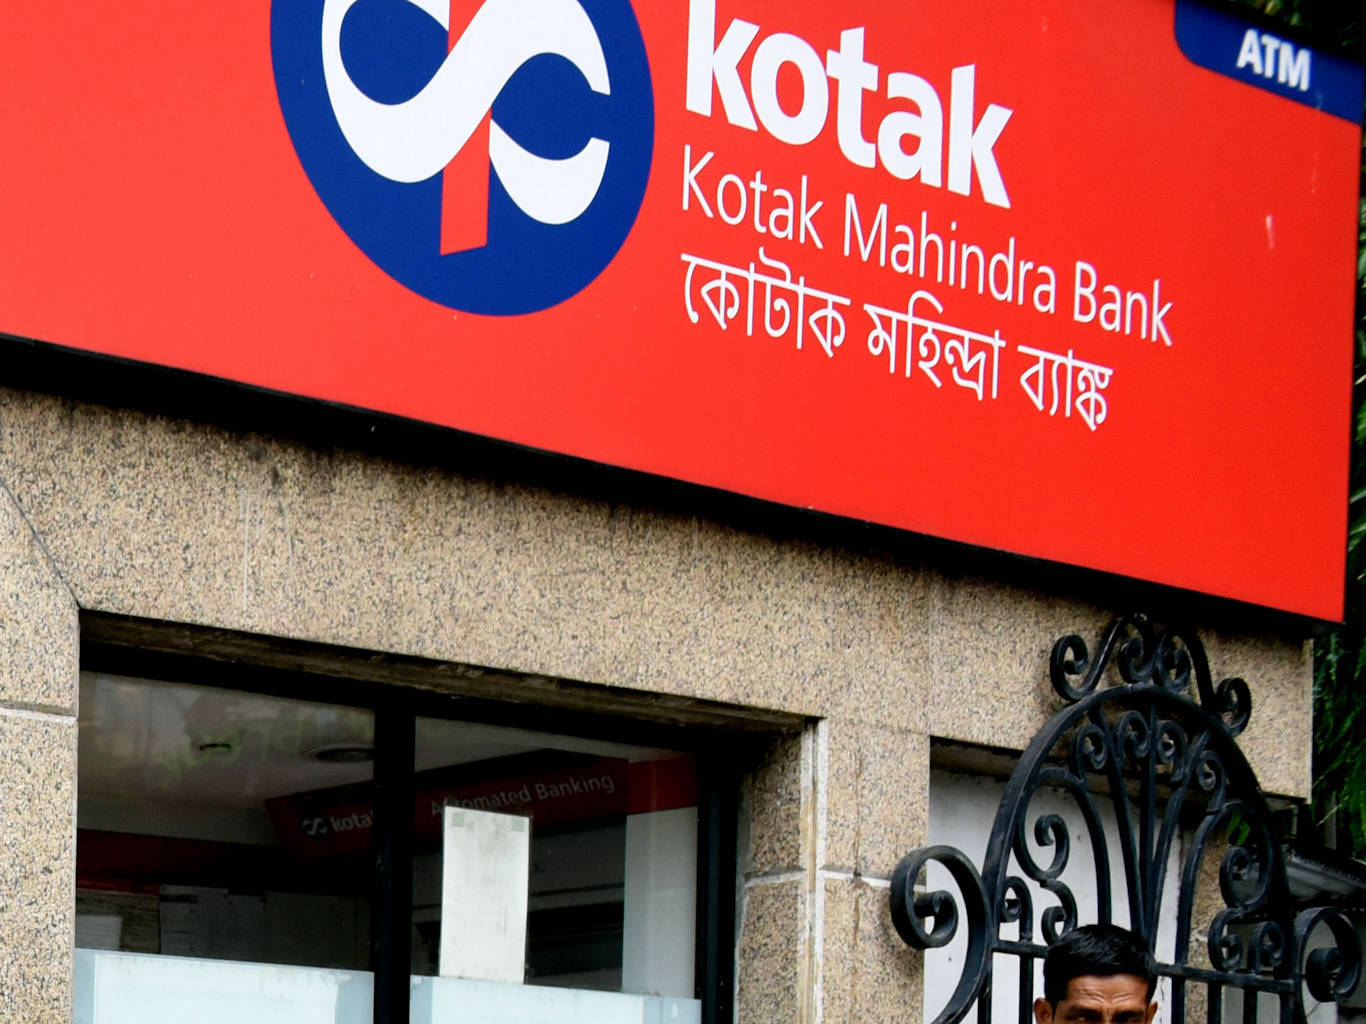 Kotak Mahindra Bank's earnings may reflect the pain in India's auto sector  as well as the rising job losses and pay cuts | Business Insider India